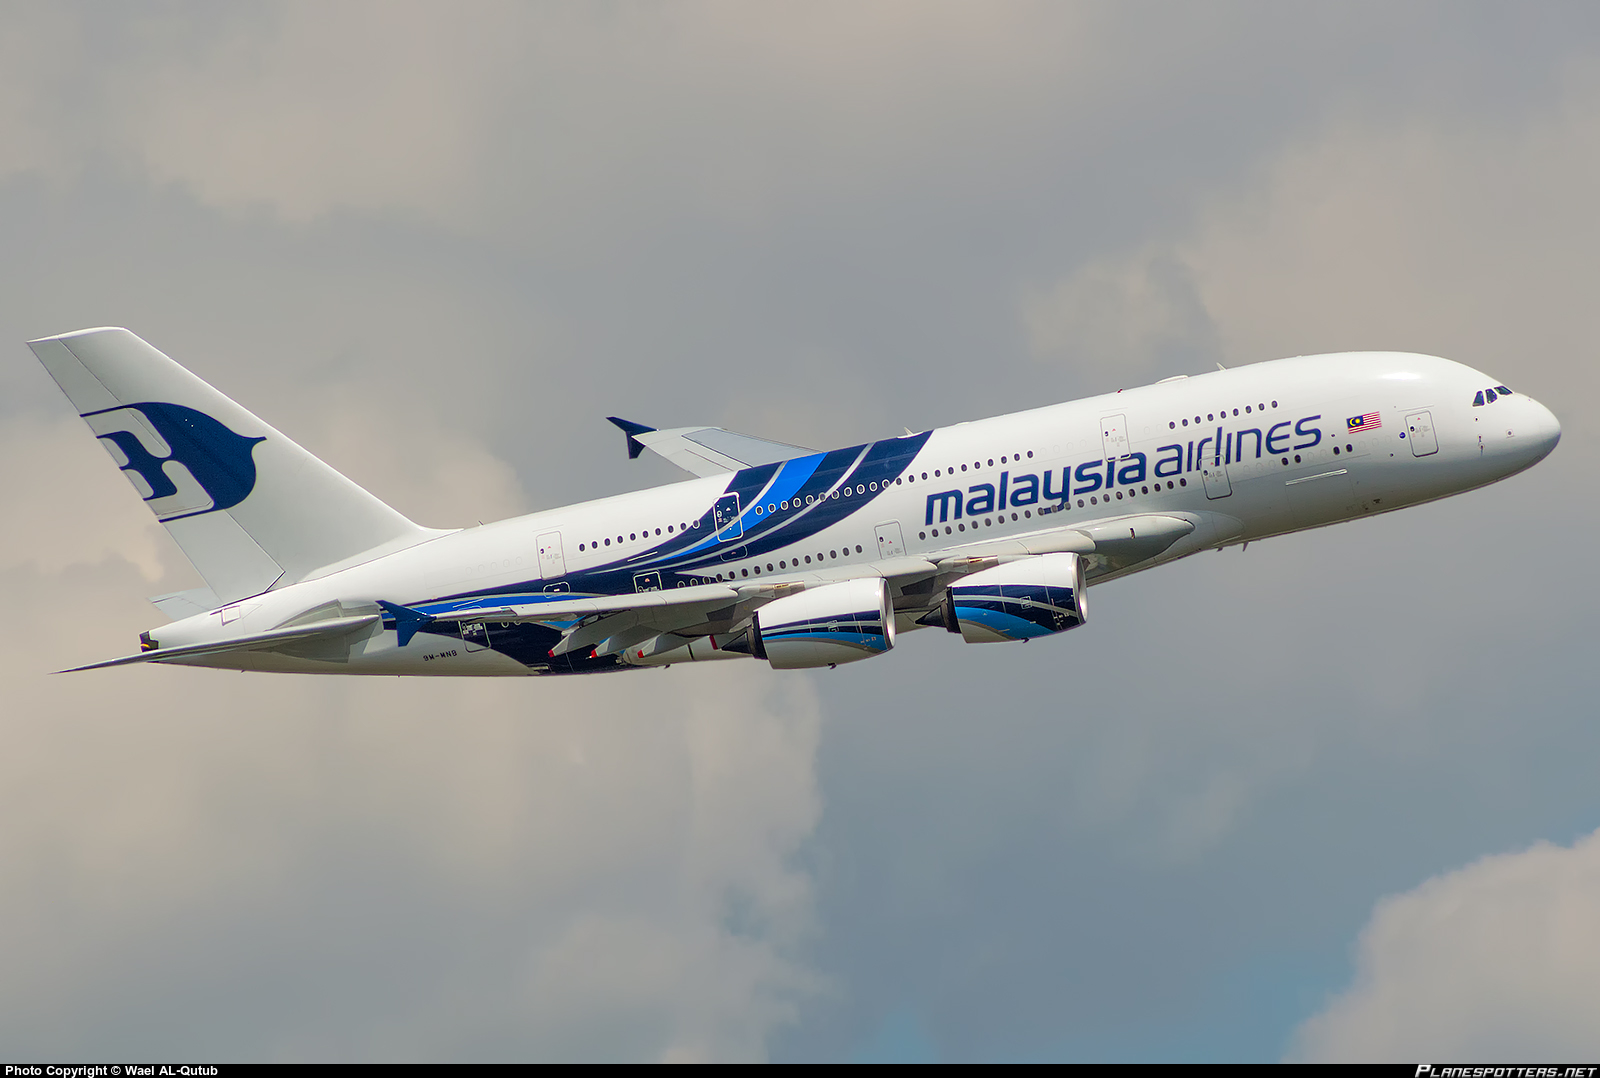 9m-mnb-malaysia-airlines-airbus-a380-841_PlanespottersNet_480707